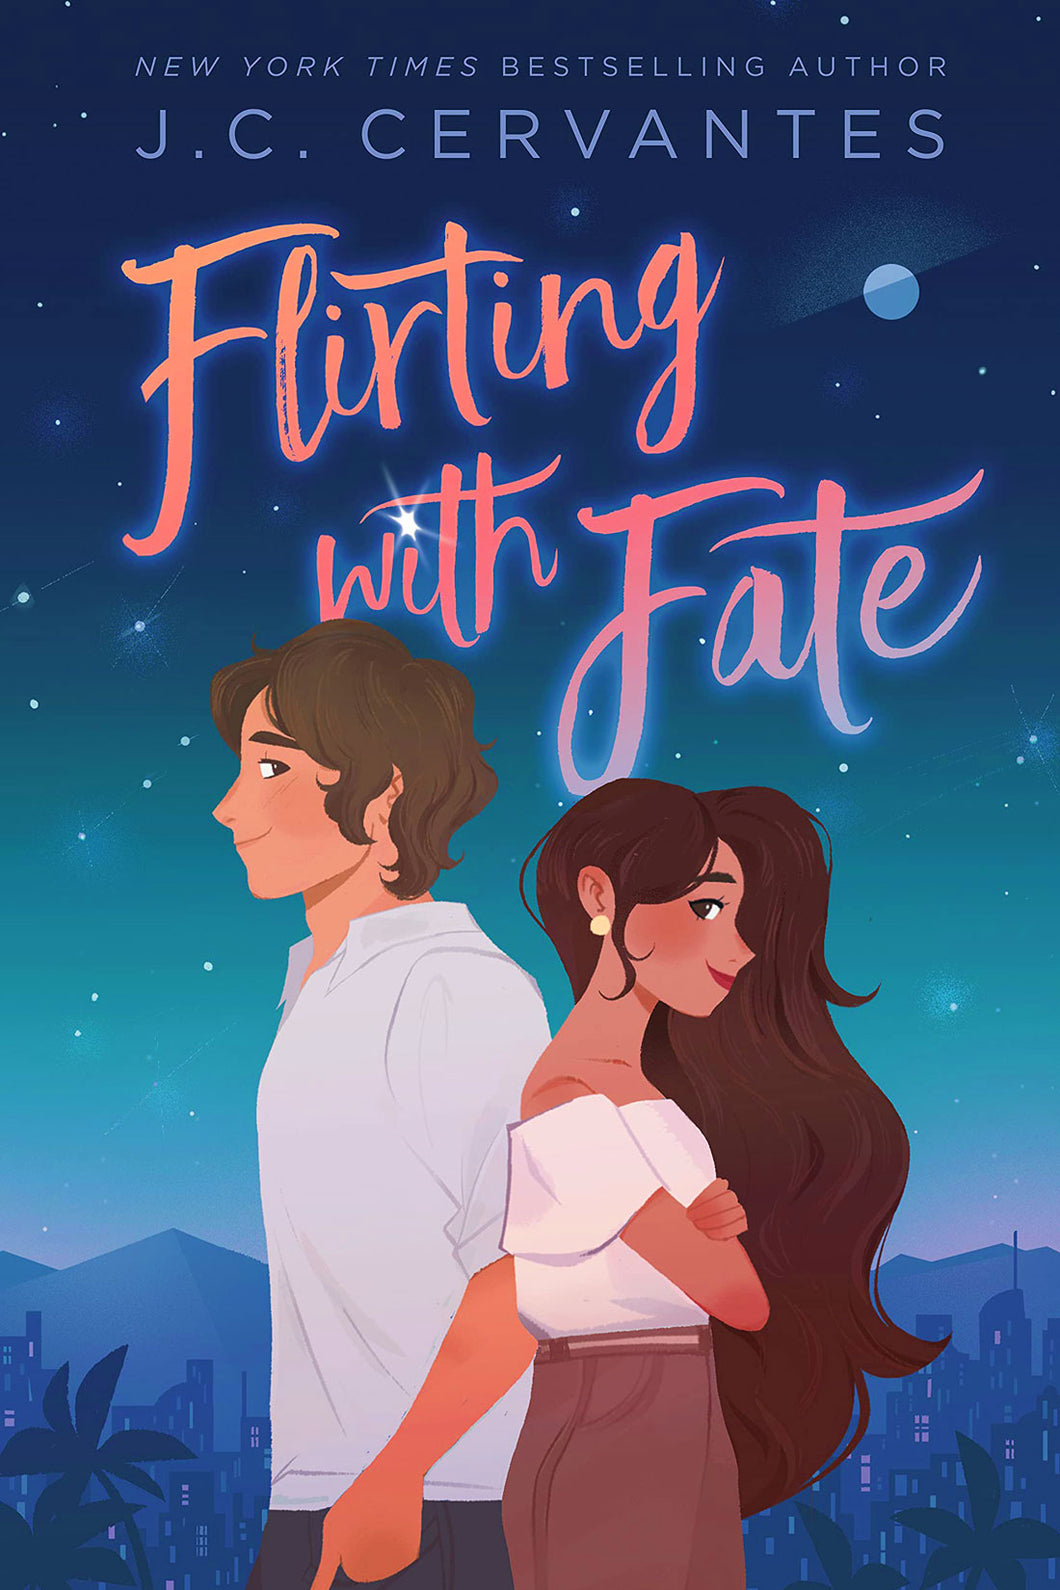 Flirting With Fate by J. C. Cervantes / Hardcover or Paperback - NEW BOOK